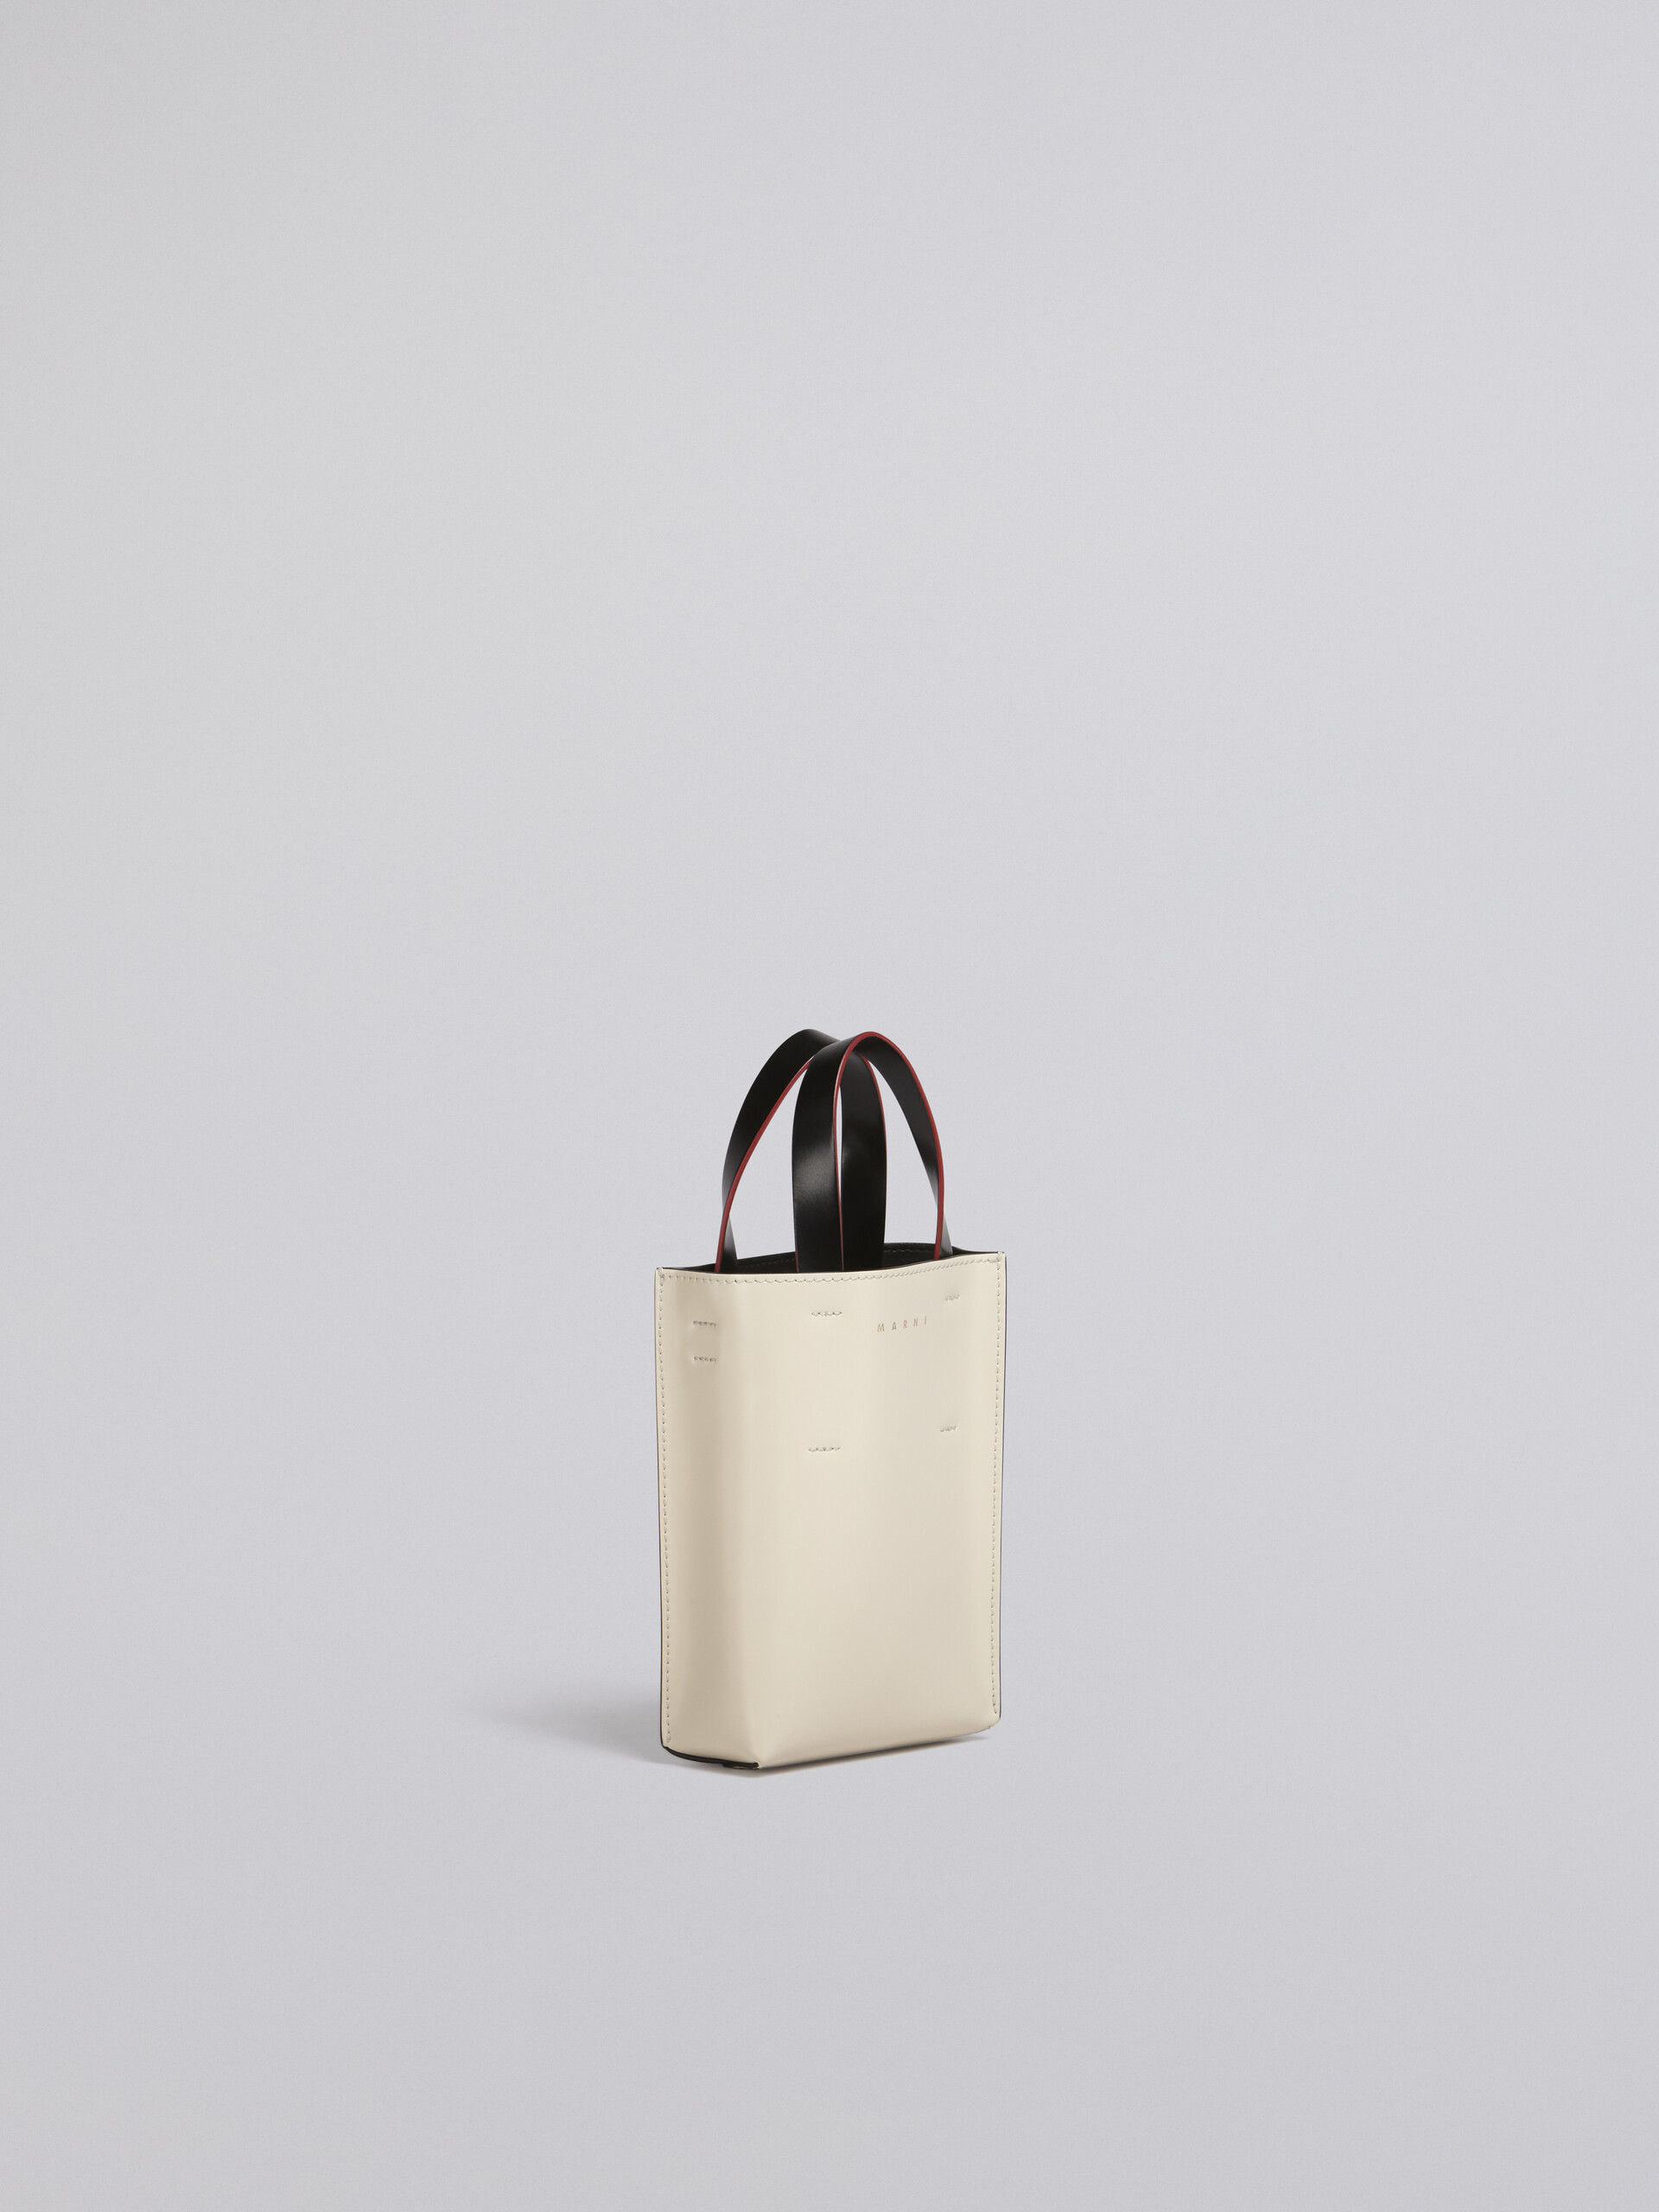 MUSEO nano bag in beige and pink shiny leather - Shopping Bags - Image 5